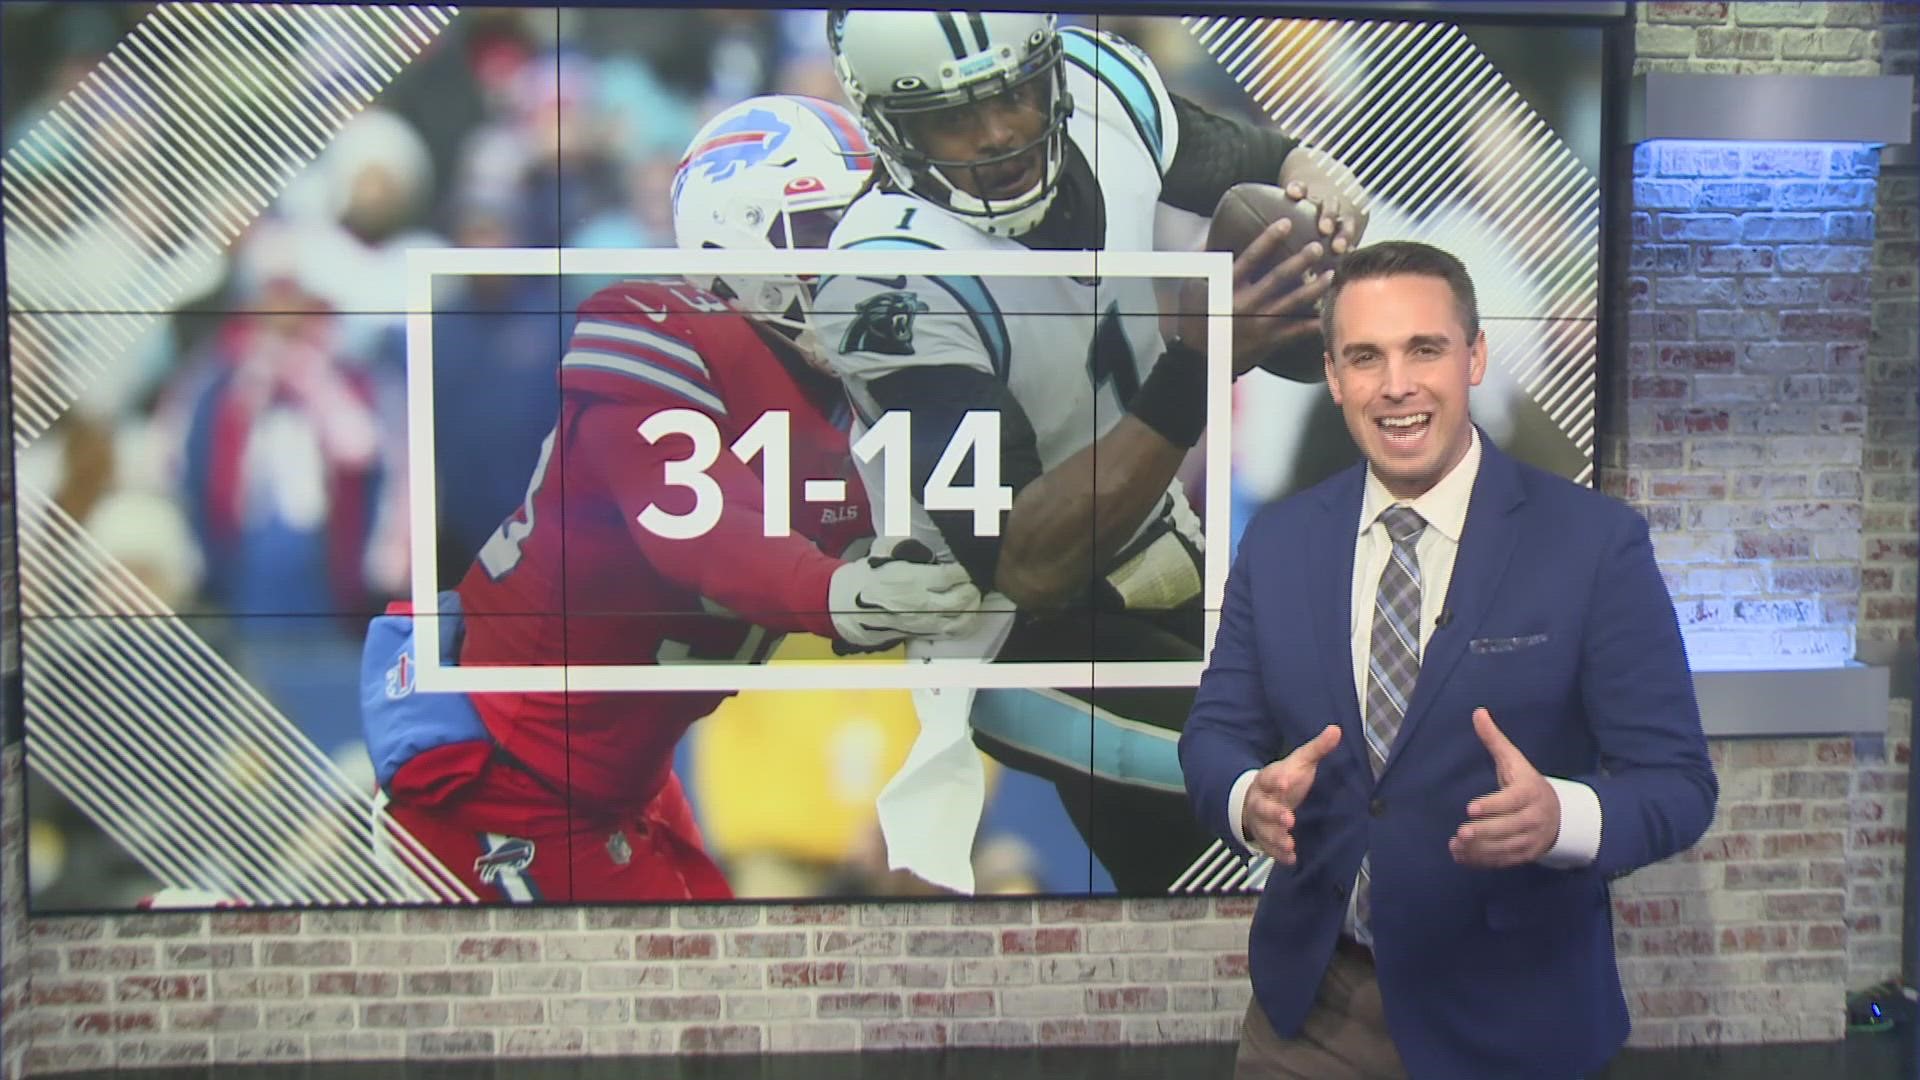 WCNC Charlotte's Nick Carboni and Locked On Panthers host Julian Council break down Sunday's 31-14 loss by the Panthers to the Bills.